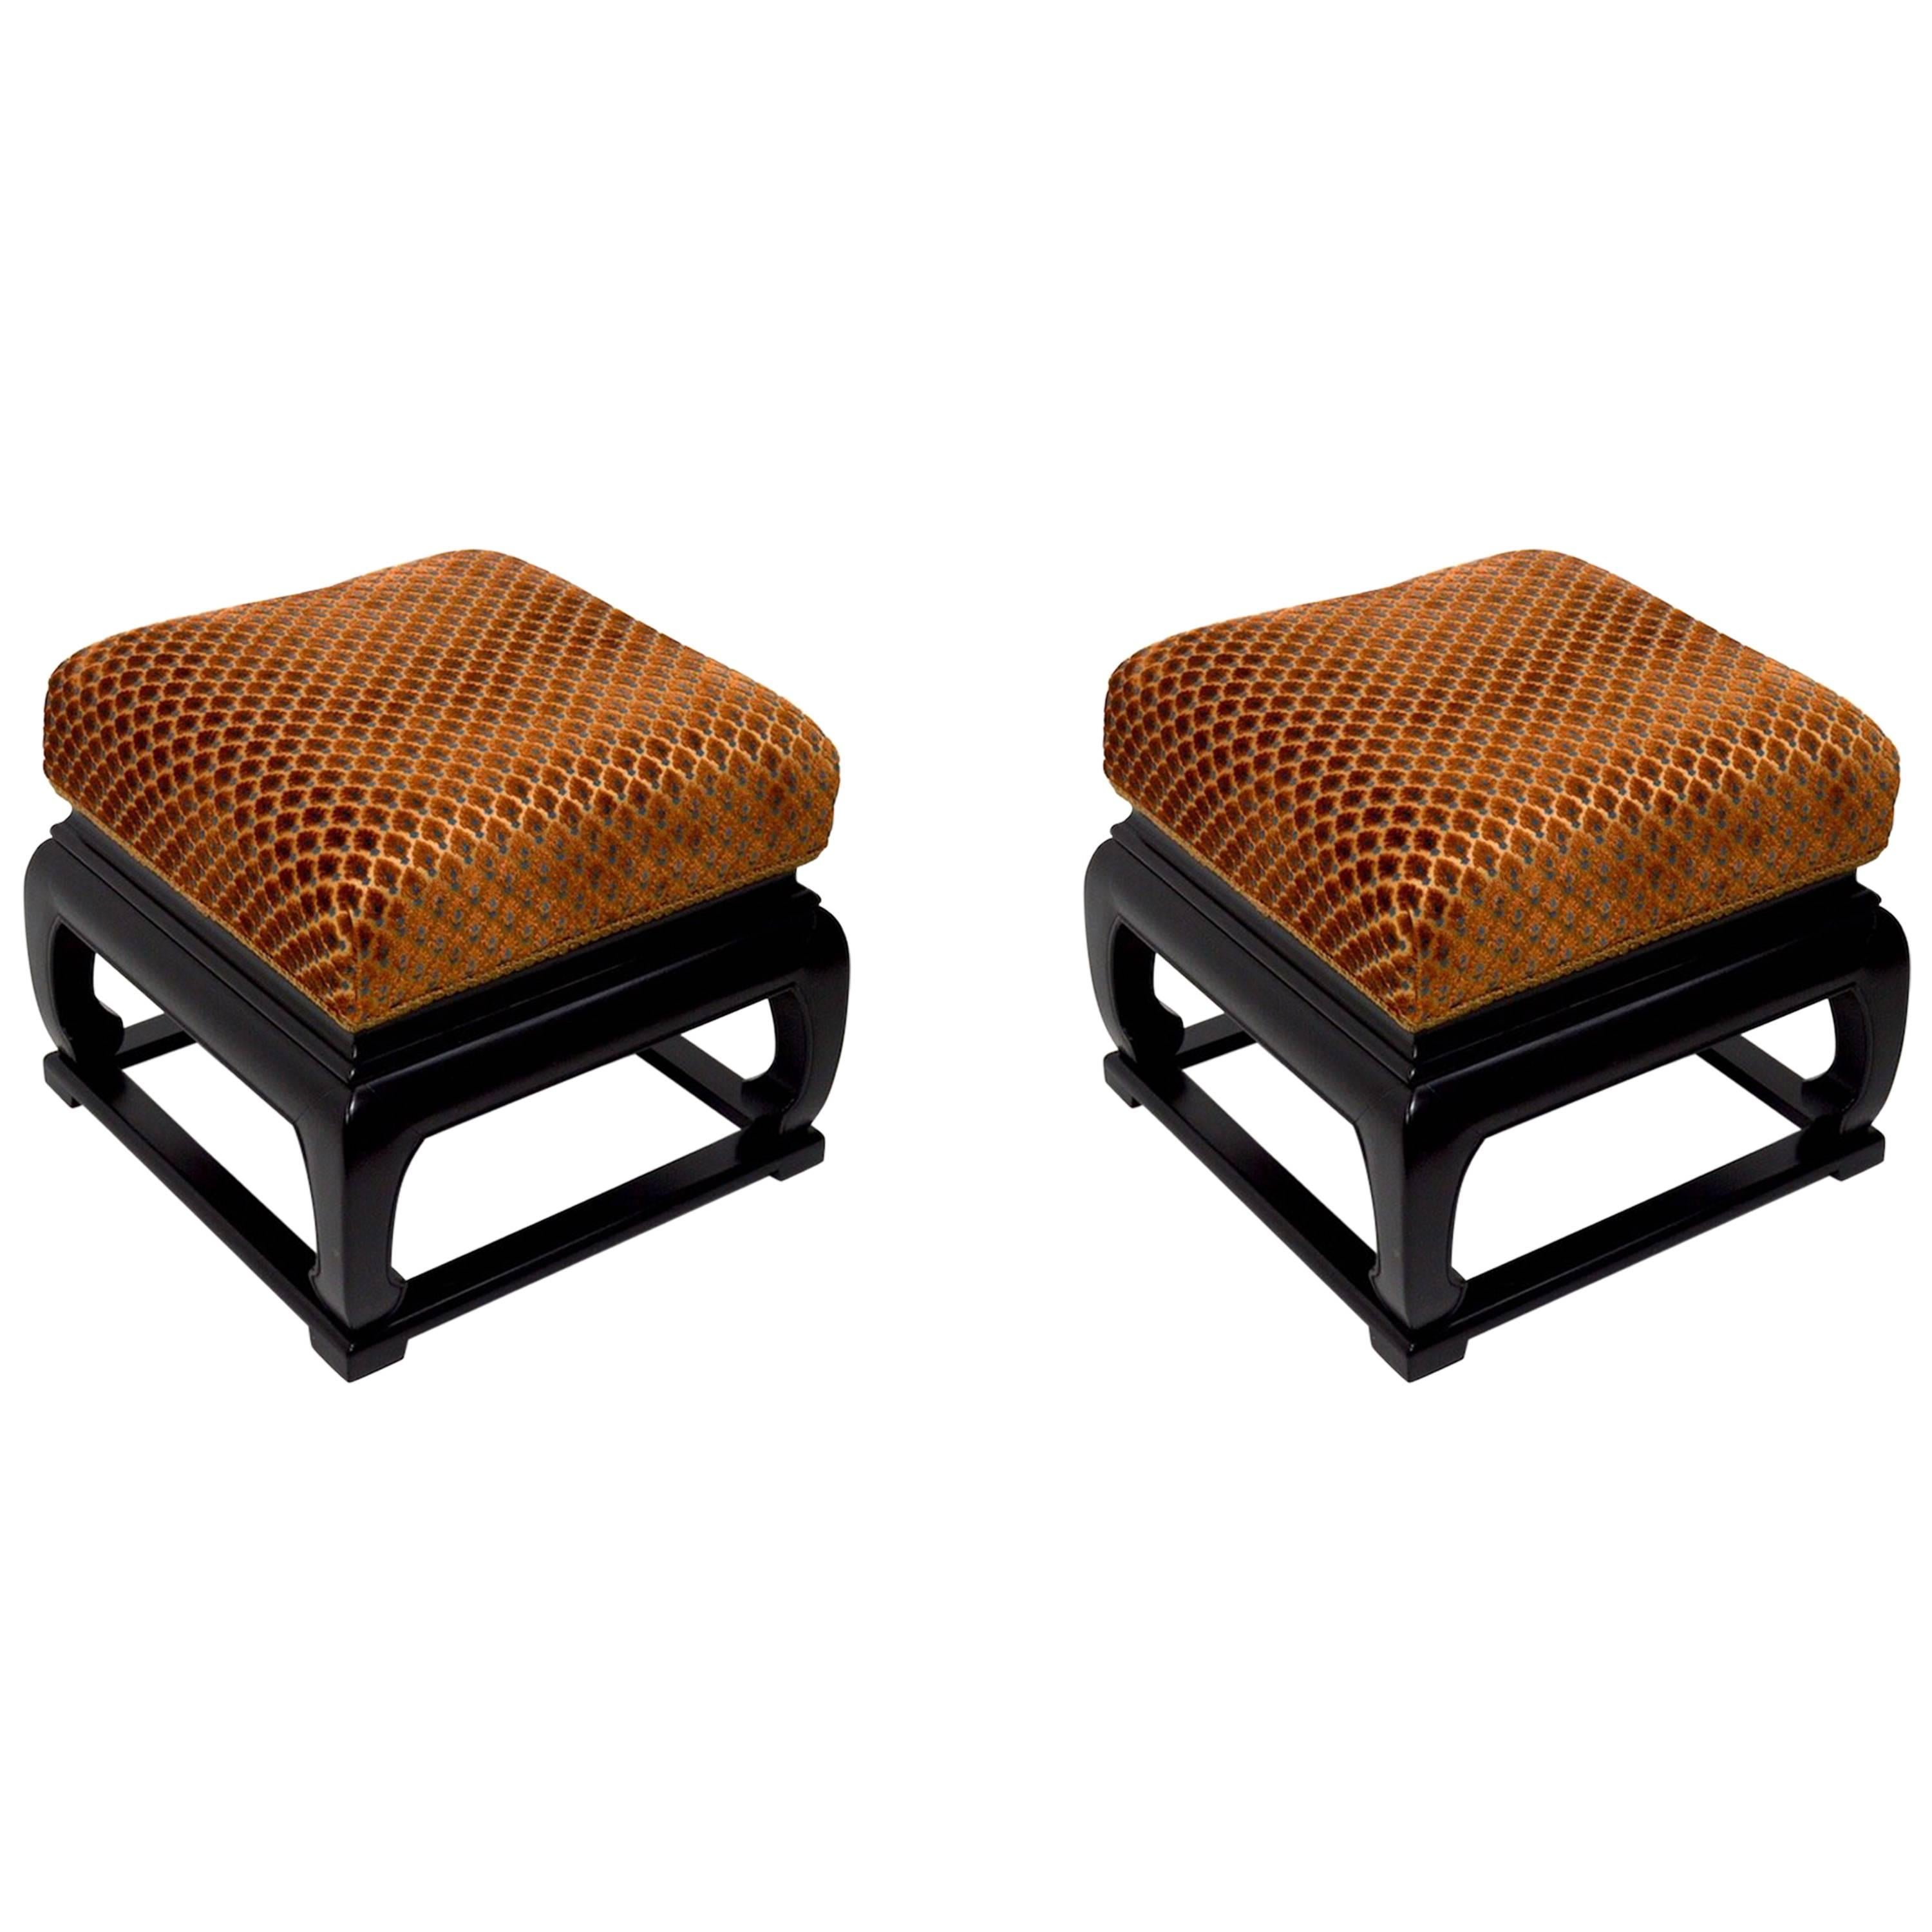 Pair of Asia Modern Chinese Style Ottoman Footrest Stools